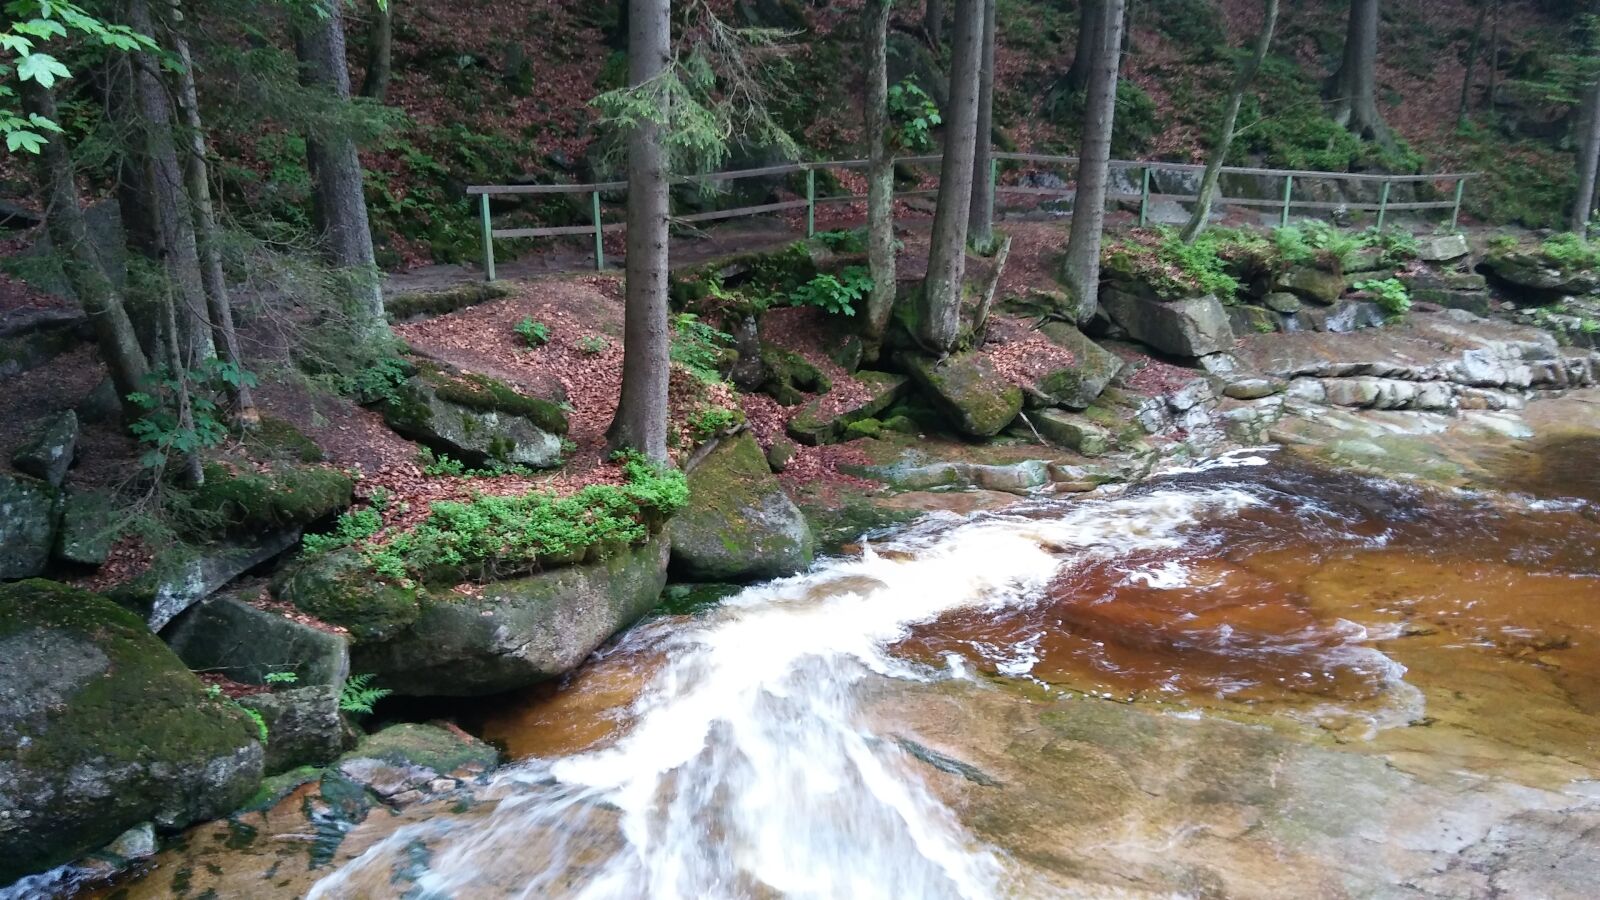 LG K10 sample photo. Harrachov, forest, water photography